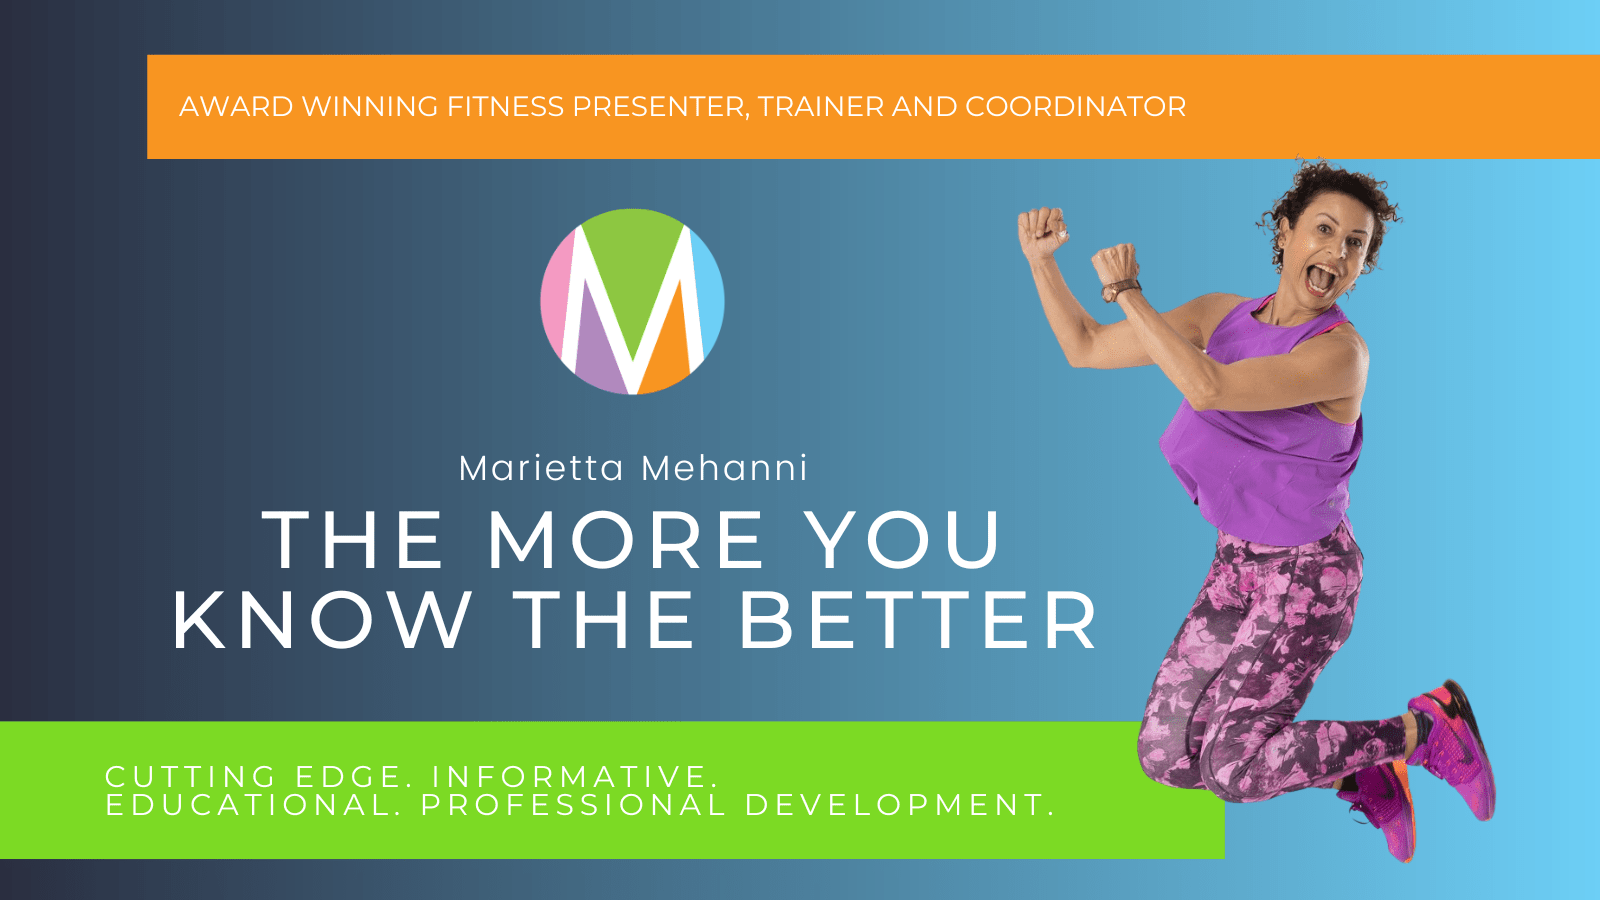 The more you know the better, Marietta Mehanni, personal growth and development, learning new things, group fitness